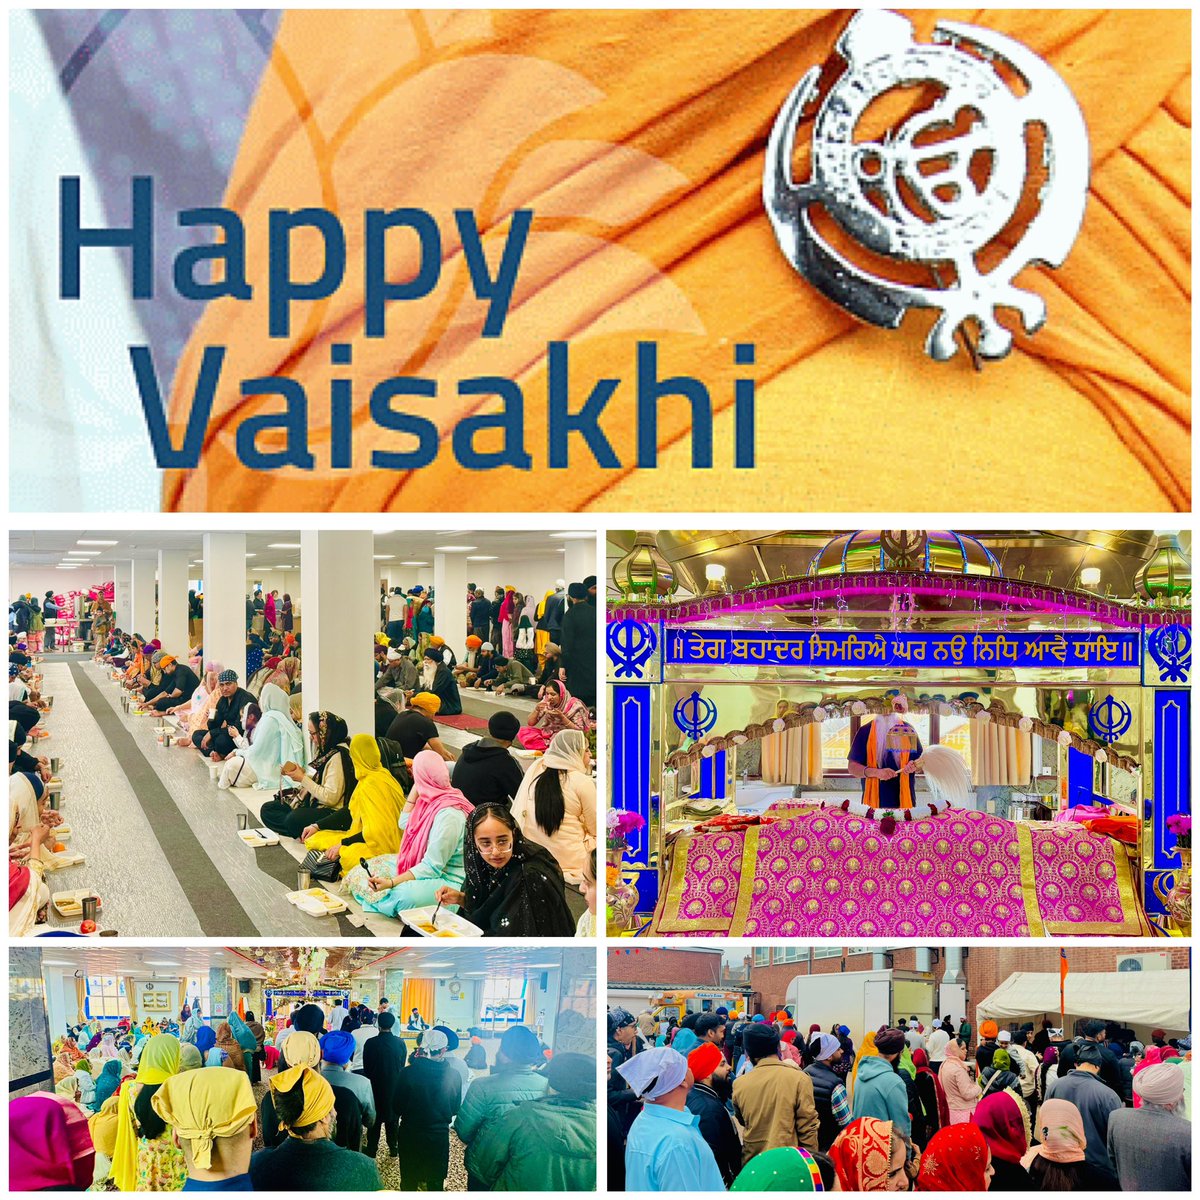 Every joyous blessing to the Khalsa Panth on the auspicious day of #Vaisakhi. Wishing eternal Chardikala to my Sikh brothers and sisters around the world. Feeling so much love from Sangat! Degh Tegh Fateh!🙏💙🧡